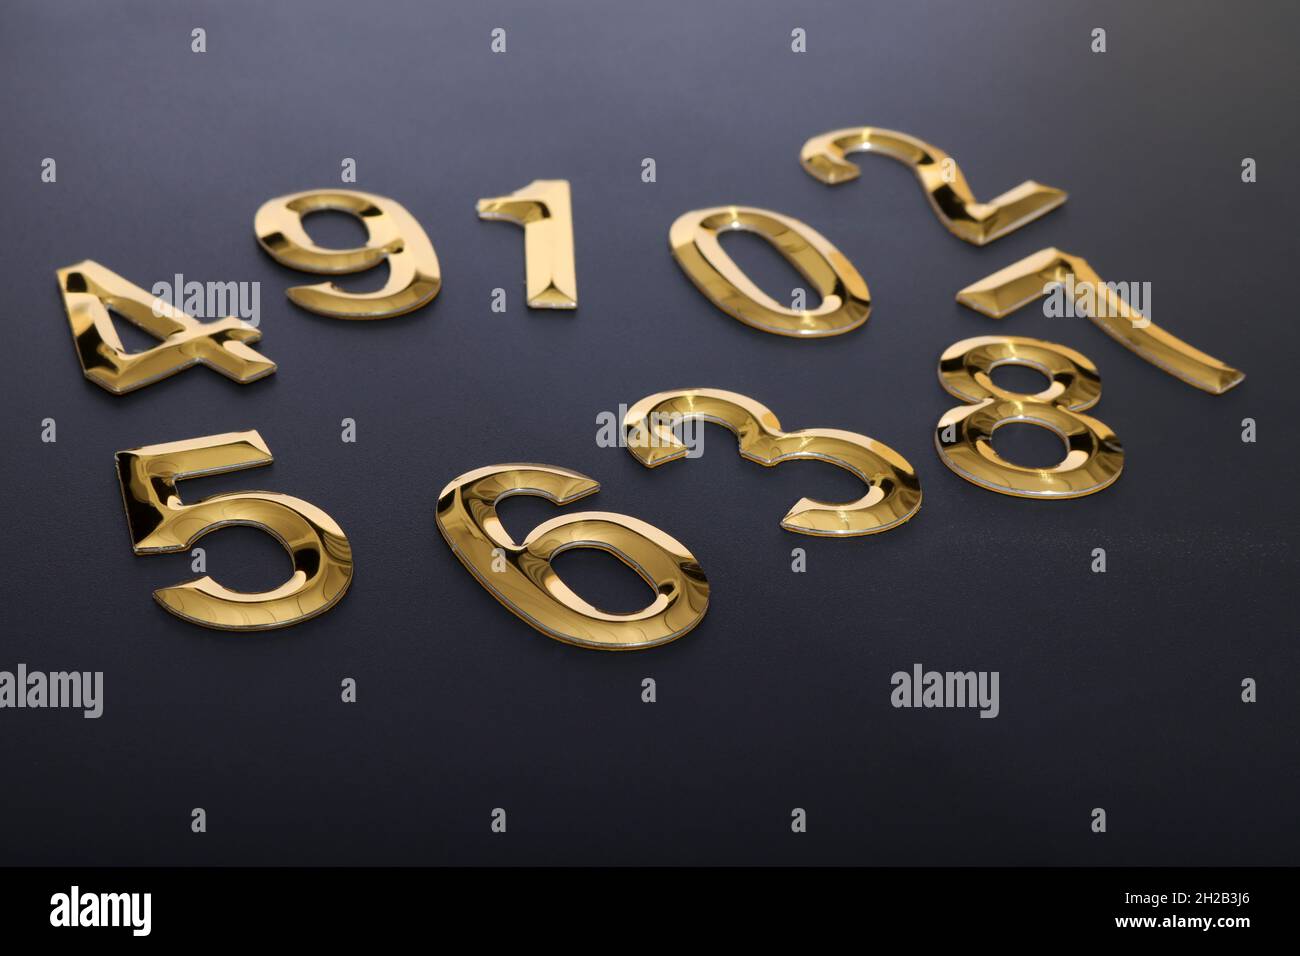 Numbers on a black background Stock Photo